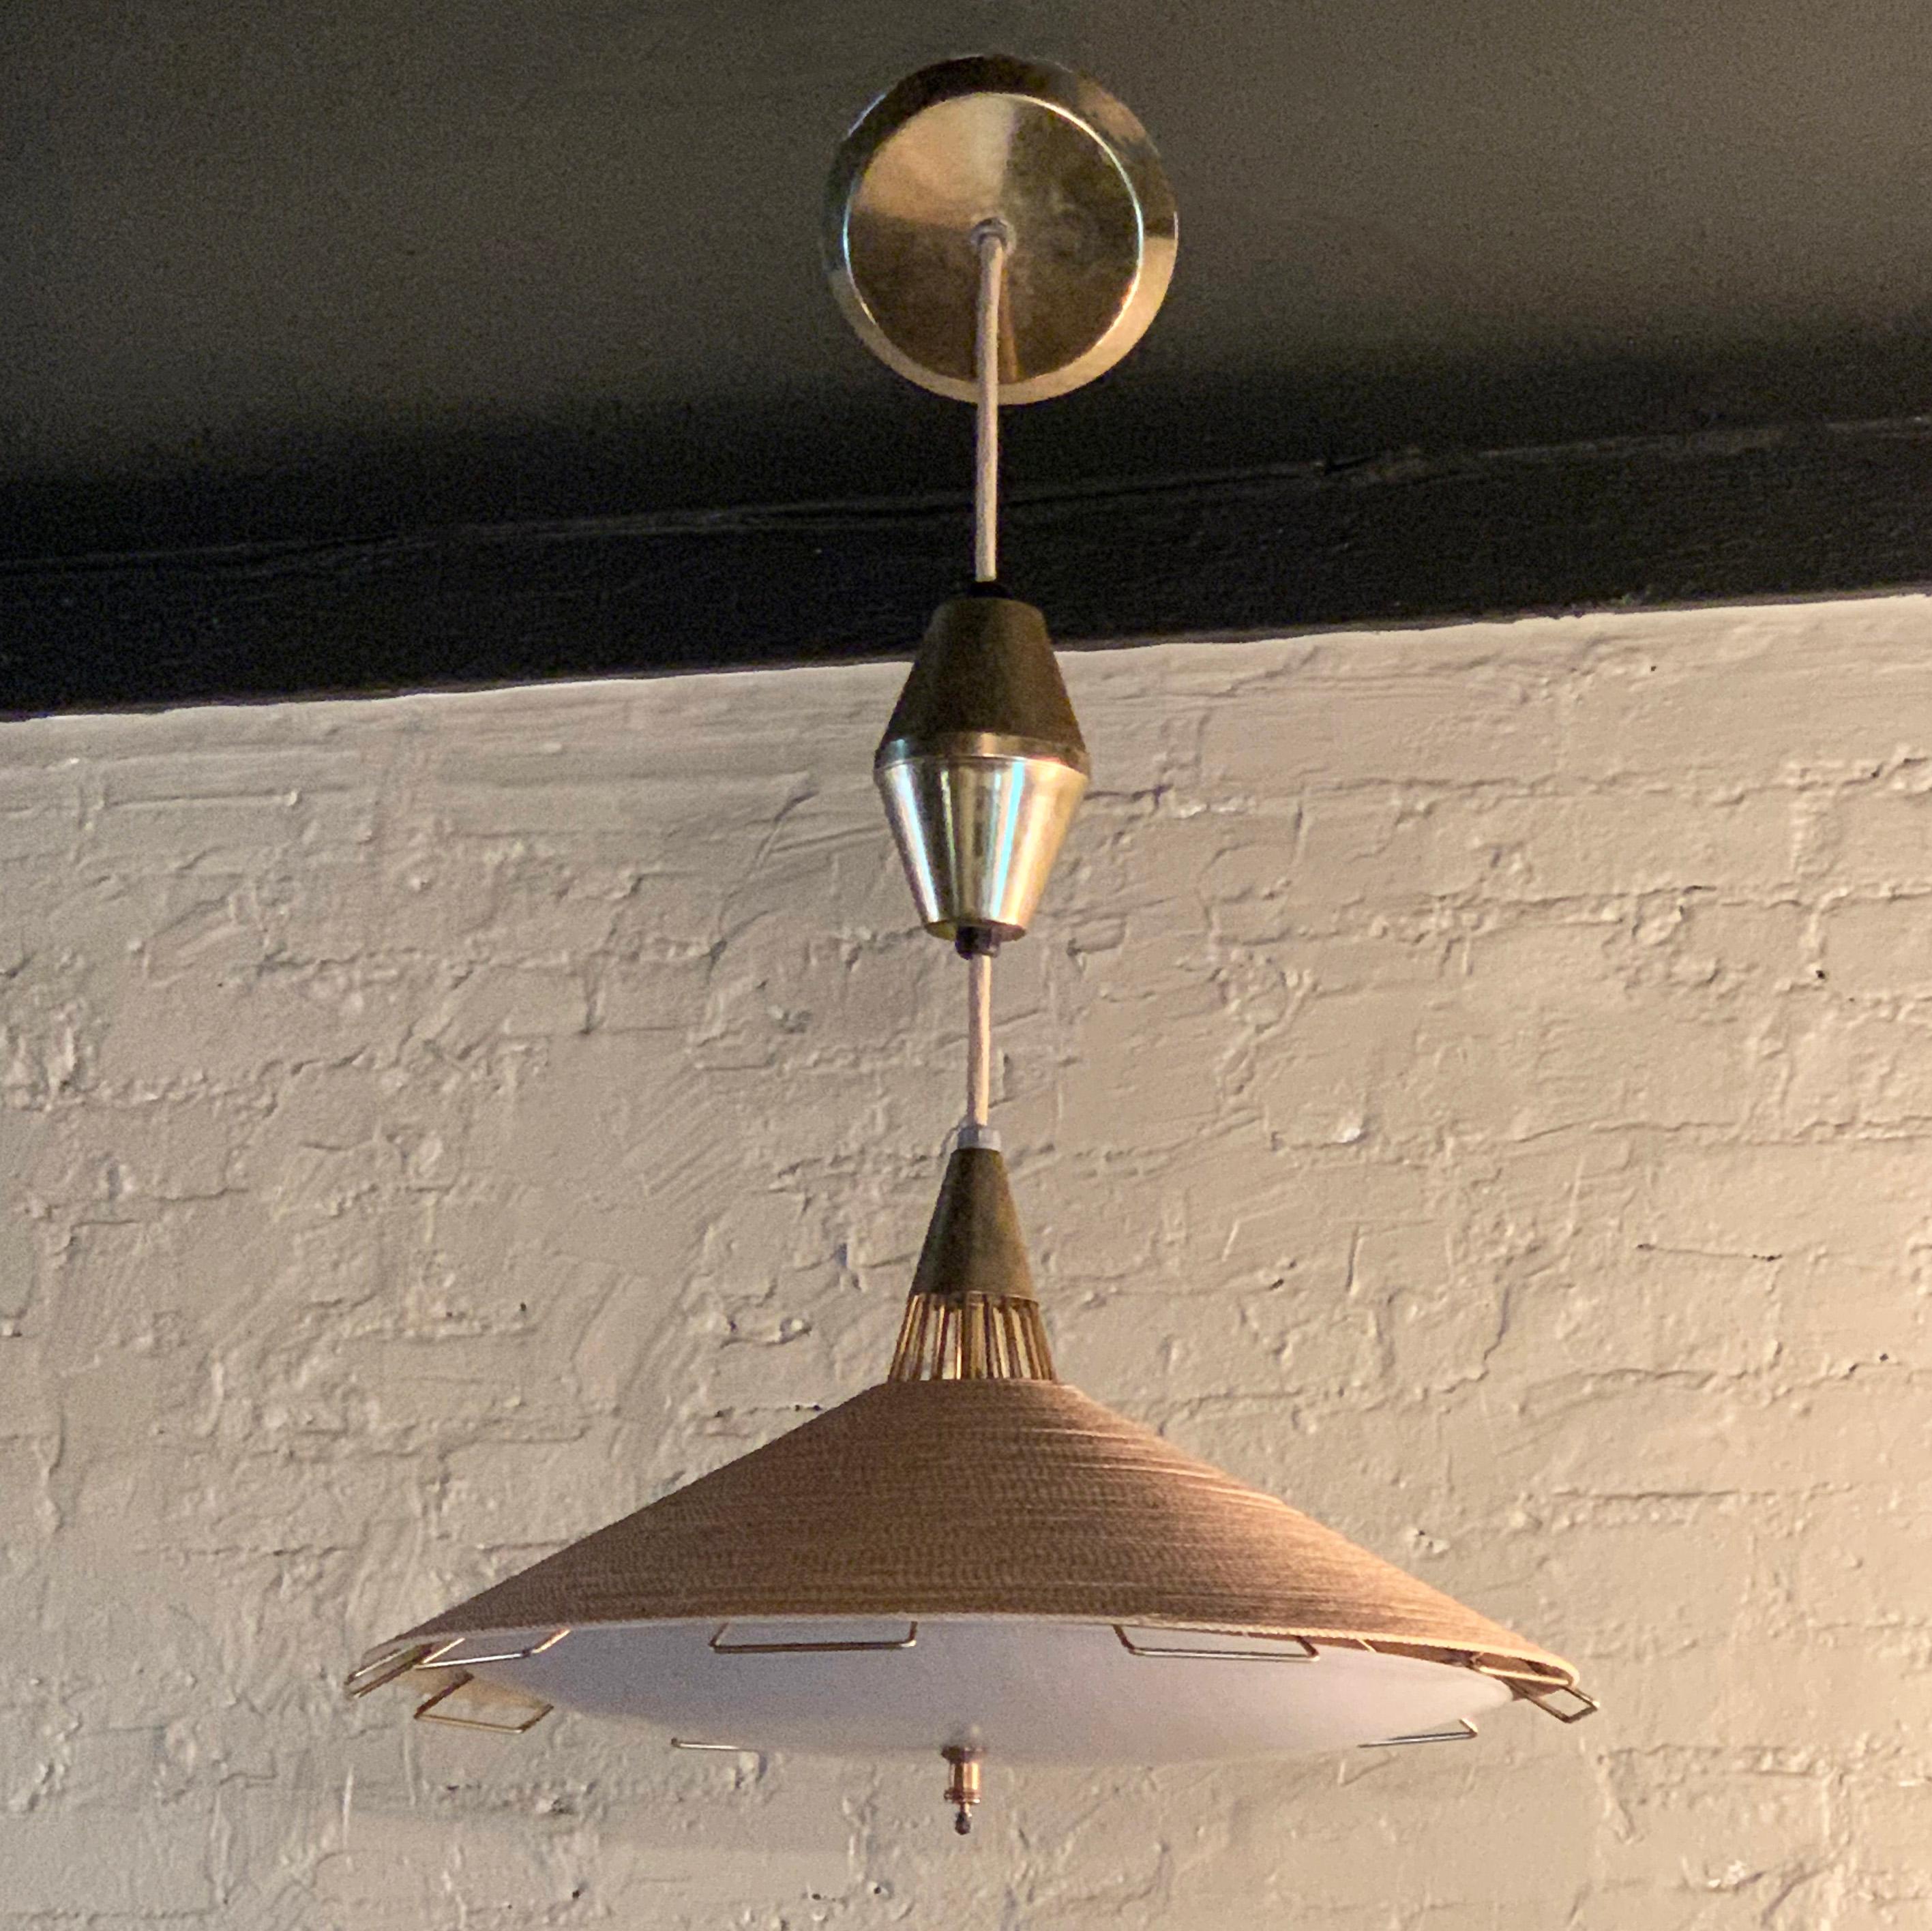 Mid-Century Modern, pendant light by Moe Light features a whirl cord wrapped disc shade with fiberglass diffuser and brass wire detail, has a spring loaded height adjustment from 28 - 40 inches.